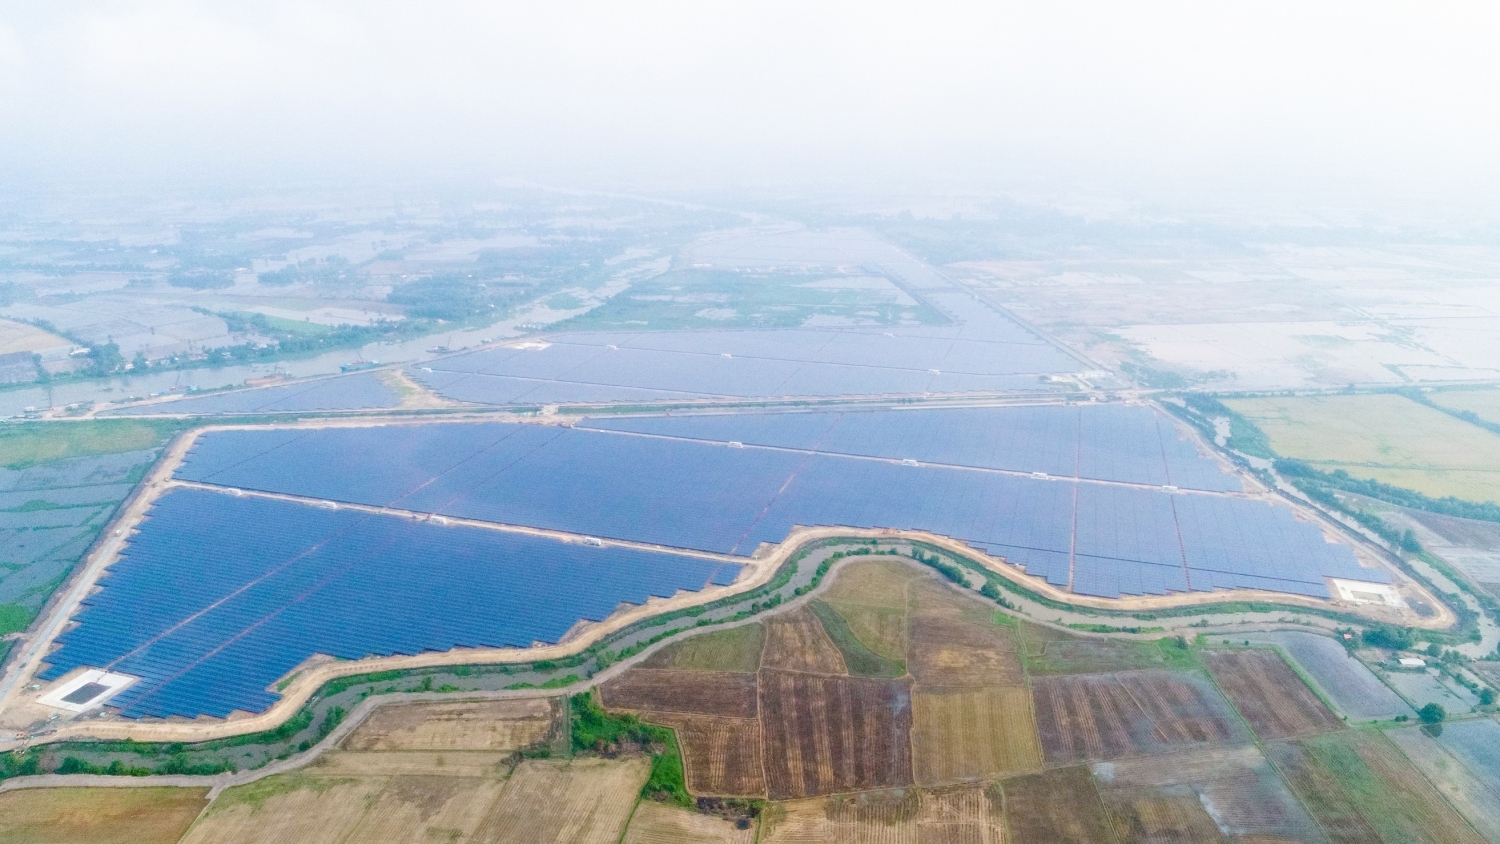 A solar power plant in Tay Ninh Province. With demand for energy increasing, the efficient use of energy and promoting renewable energy have become urgent requirements. (Photo: Courtesy of TTC)